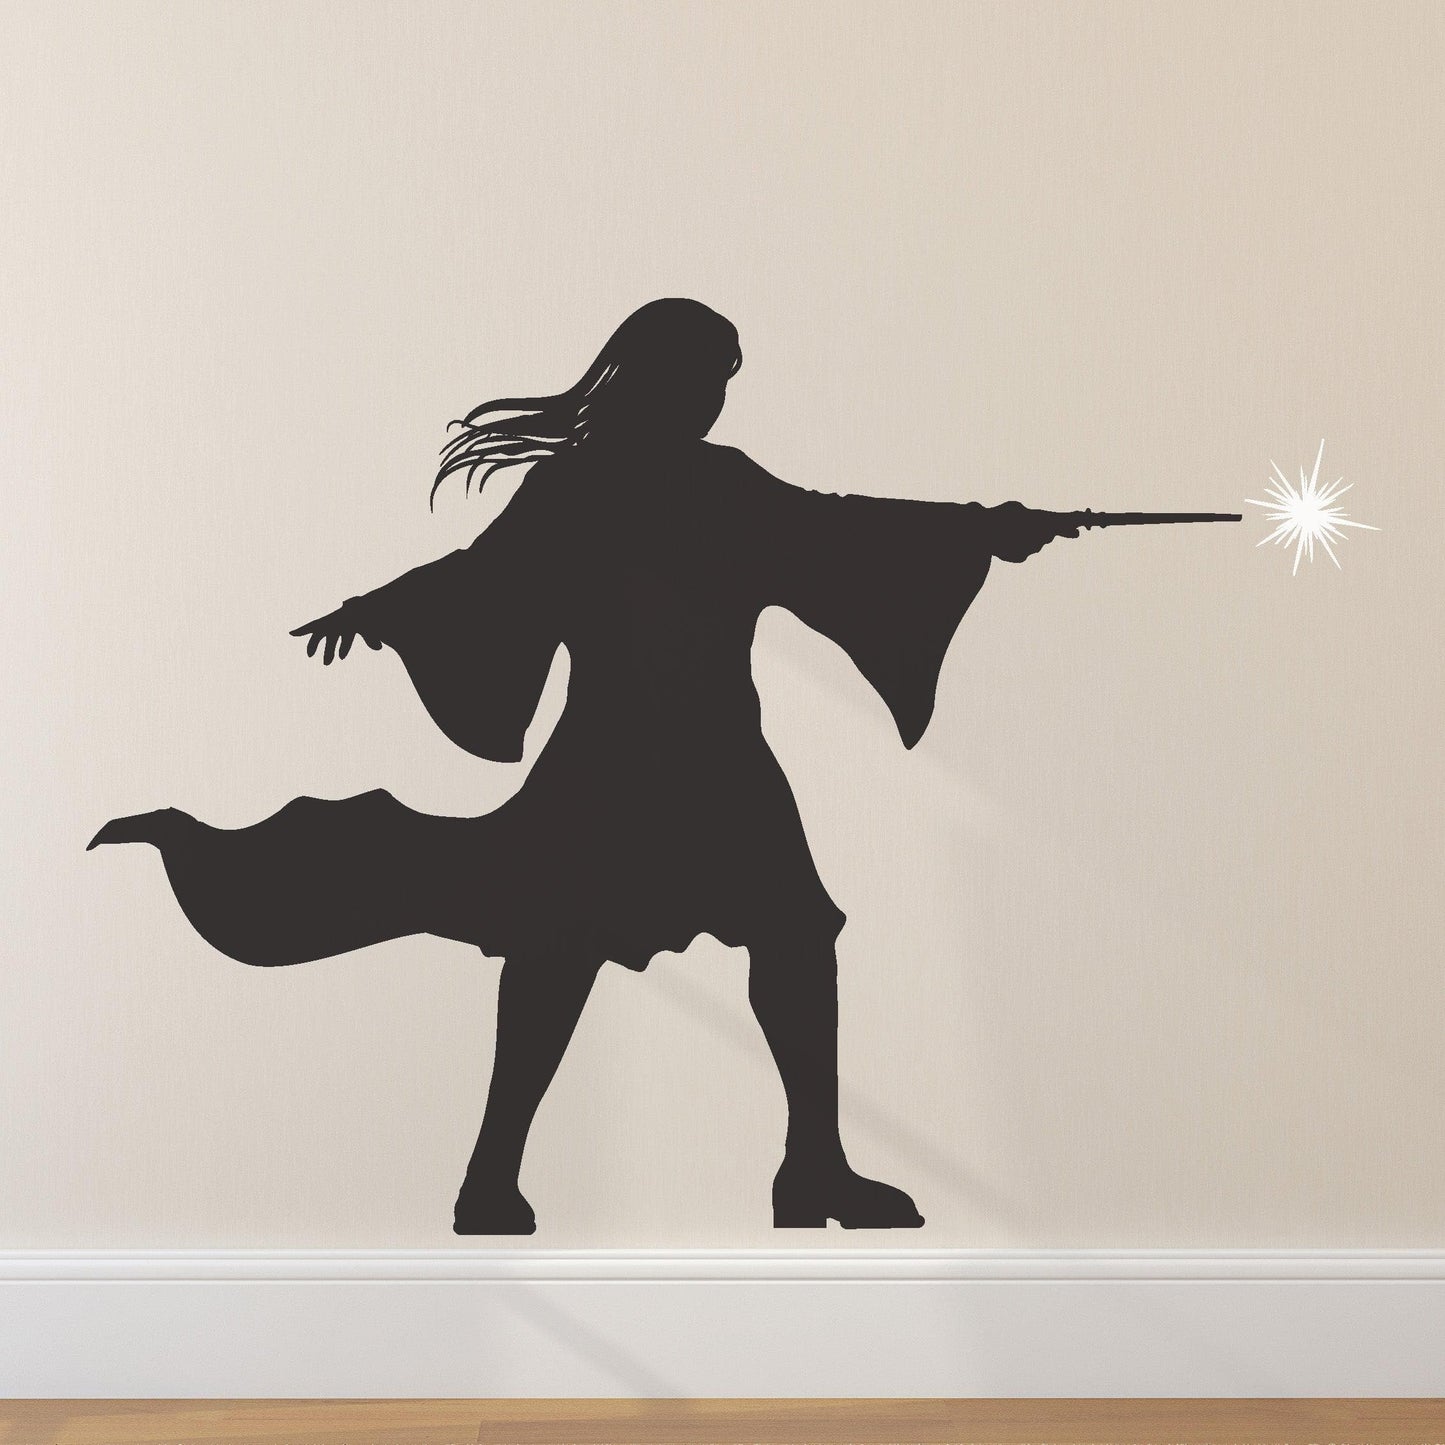 Girl Wizard Wall Decal. Wizardly World Wall Decal. #GFoster169